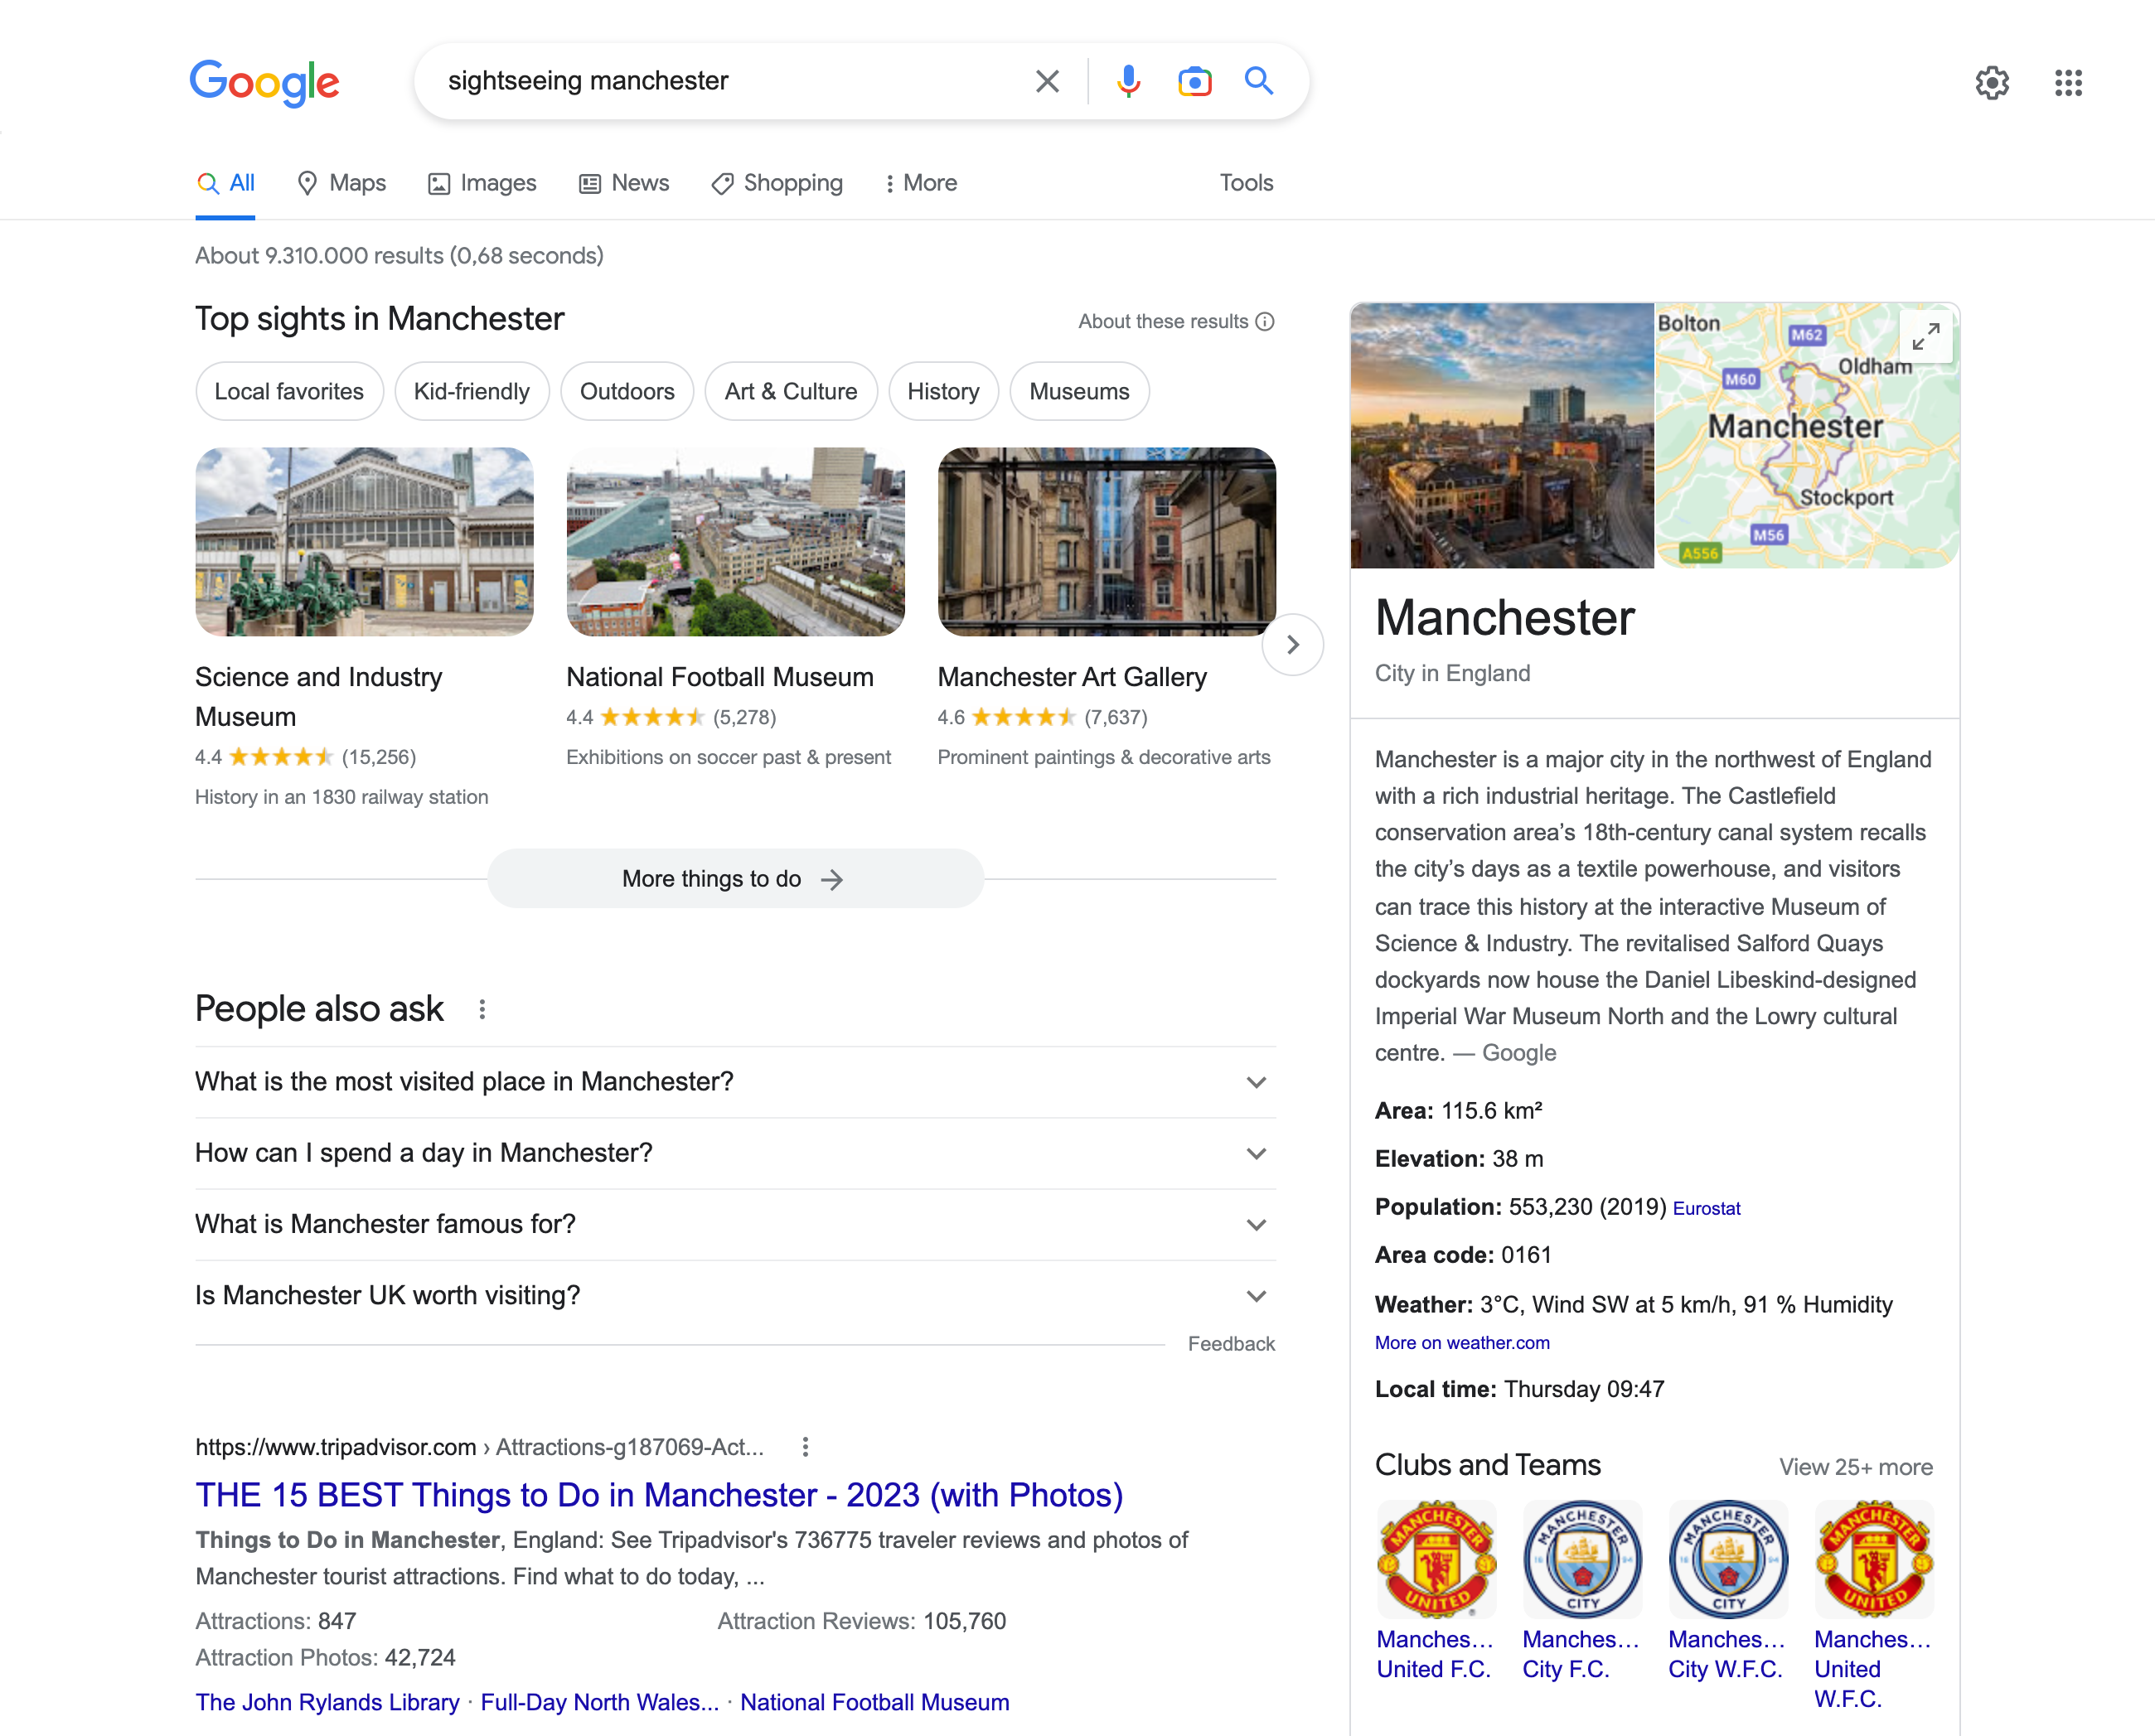 When searching Google for sights in Manchester, Google suggests a few places of interest at the top, and an info box about the city of Manchester also appears. Below that, similar questions to the search query appear, as well as a link from tripadvisor to the 15 best things to do in Manchester.